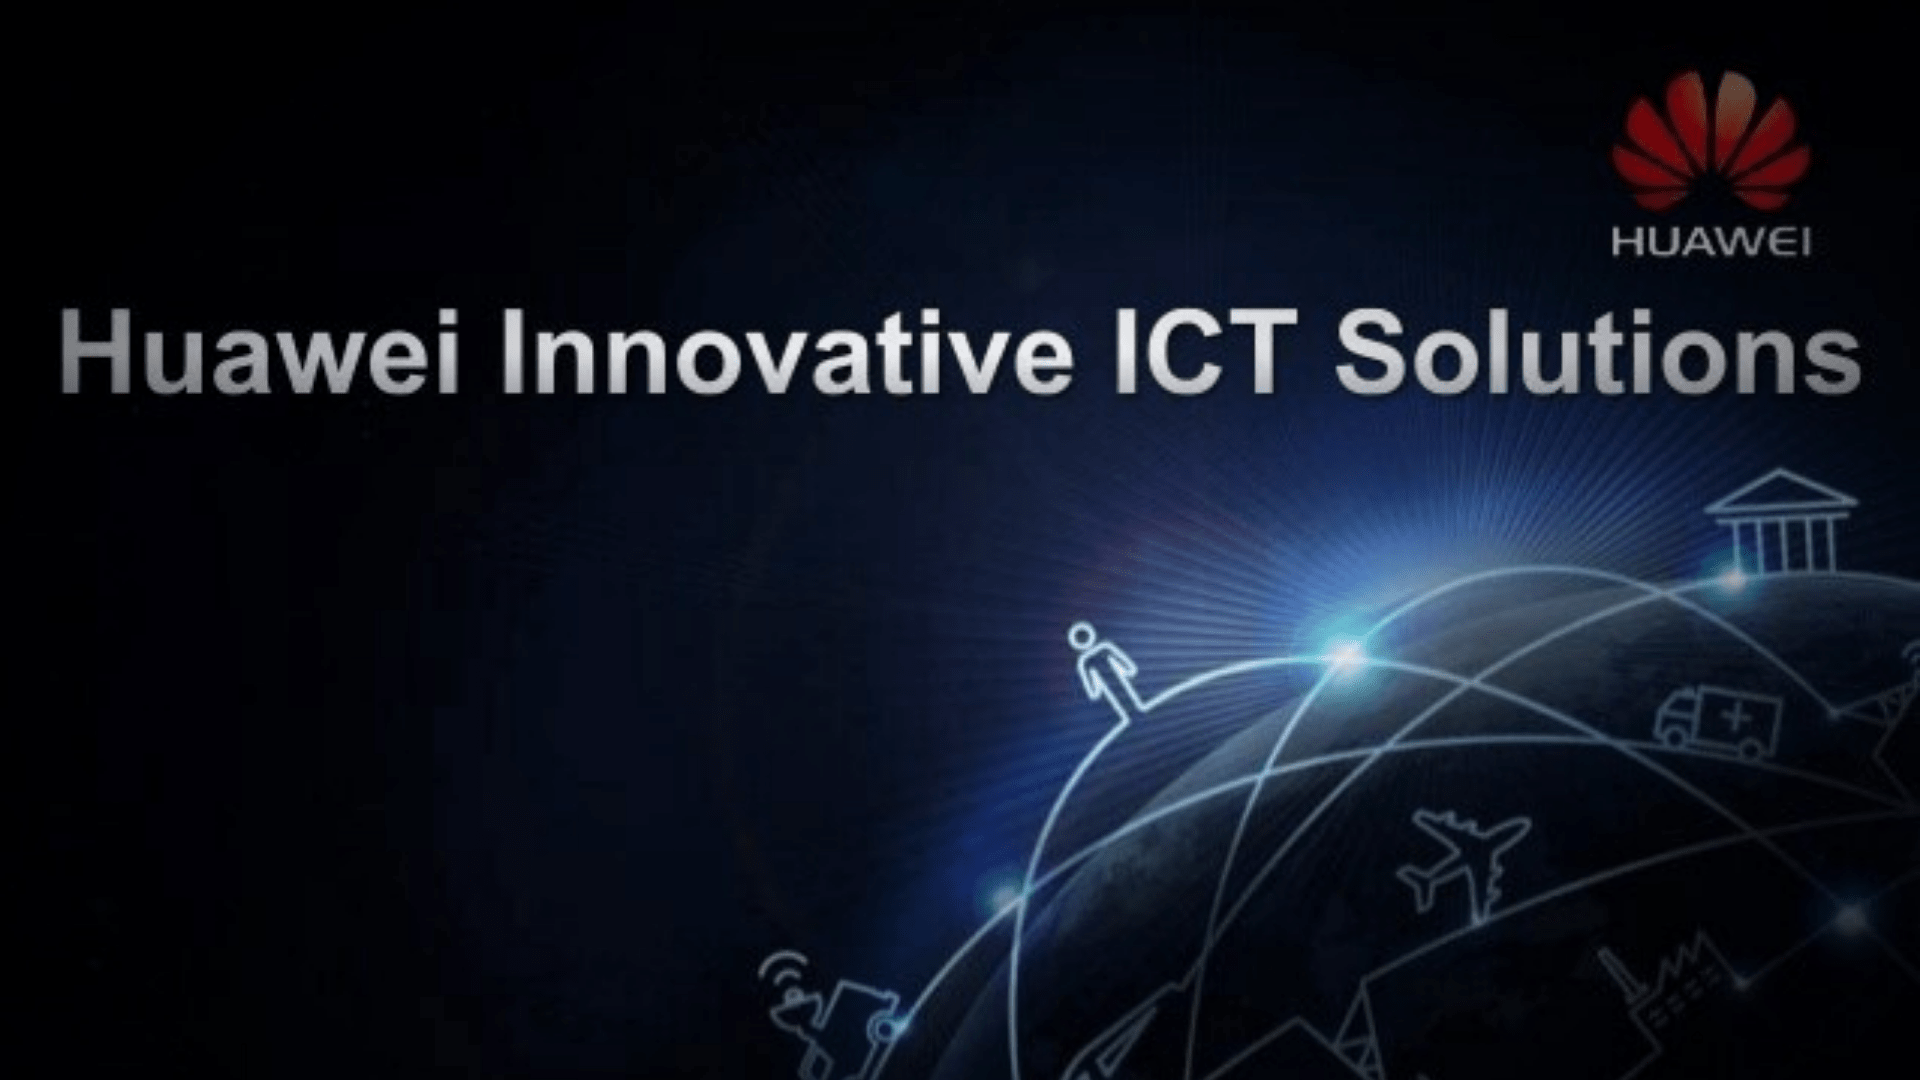 The Pakistani government supports Huawei's ICT solutions